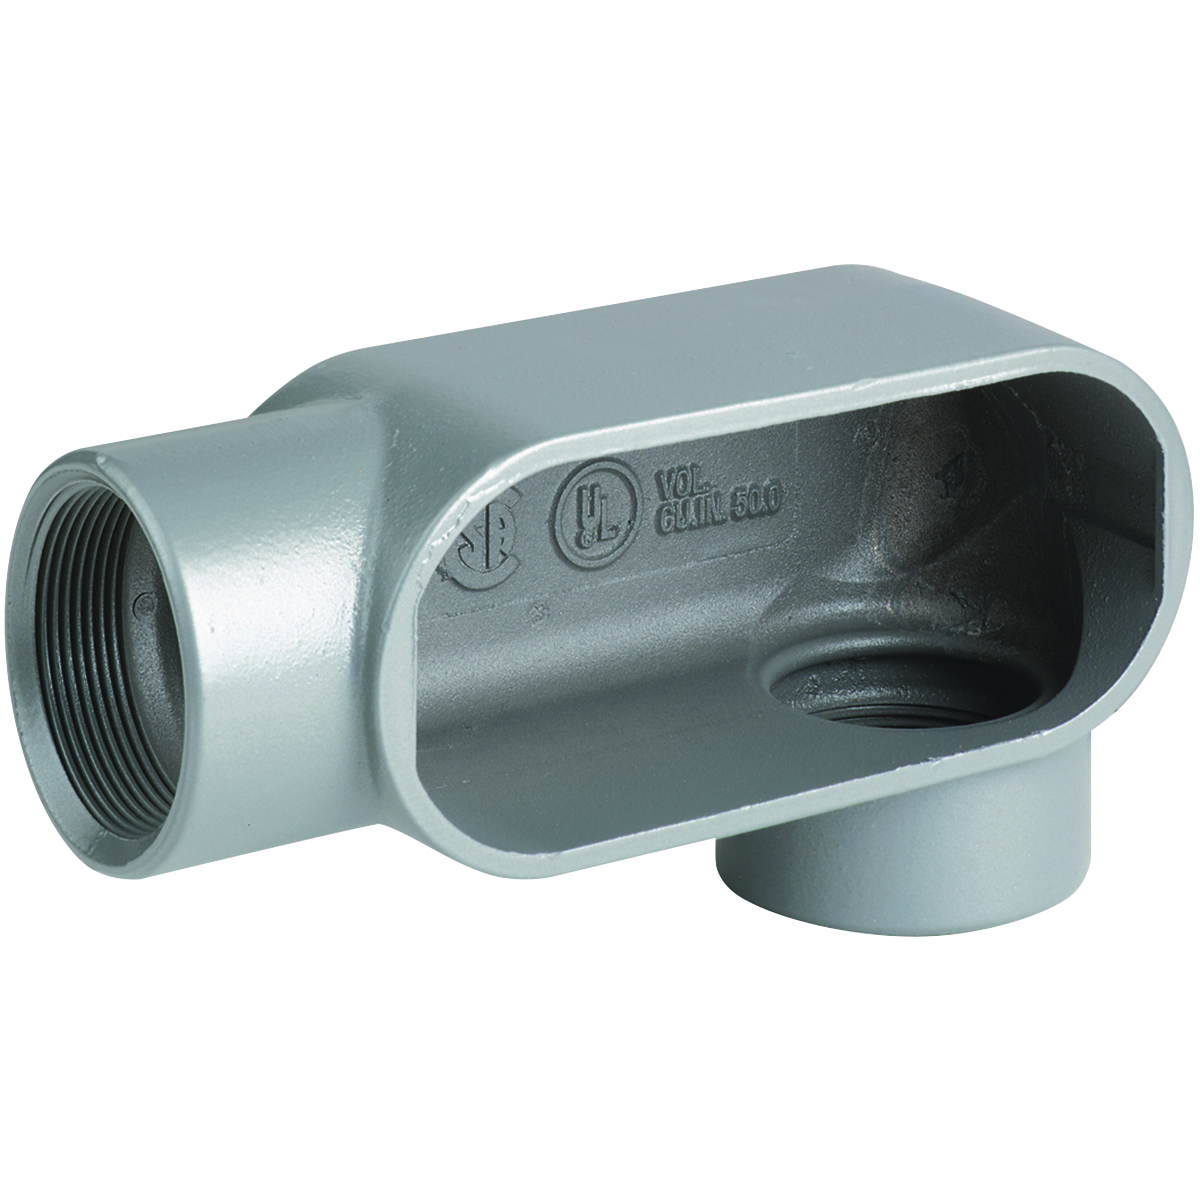 DURALOY 7 SERIES - IRON CONDUIT BODY - LL TYPE - HUB SIZE 1 INCH -VOLUME 11.0 CUBIC INCHES